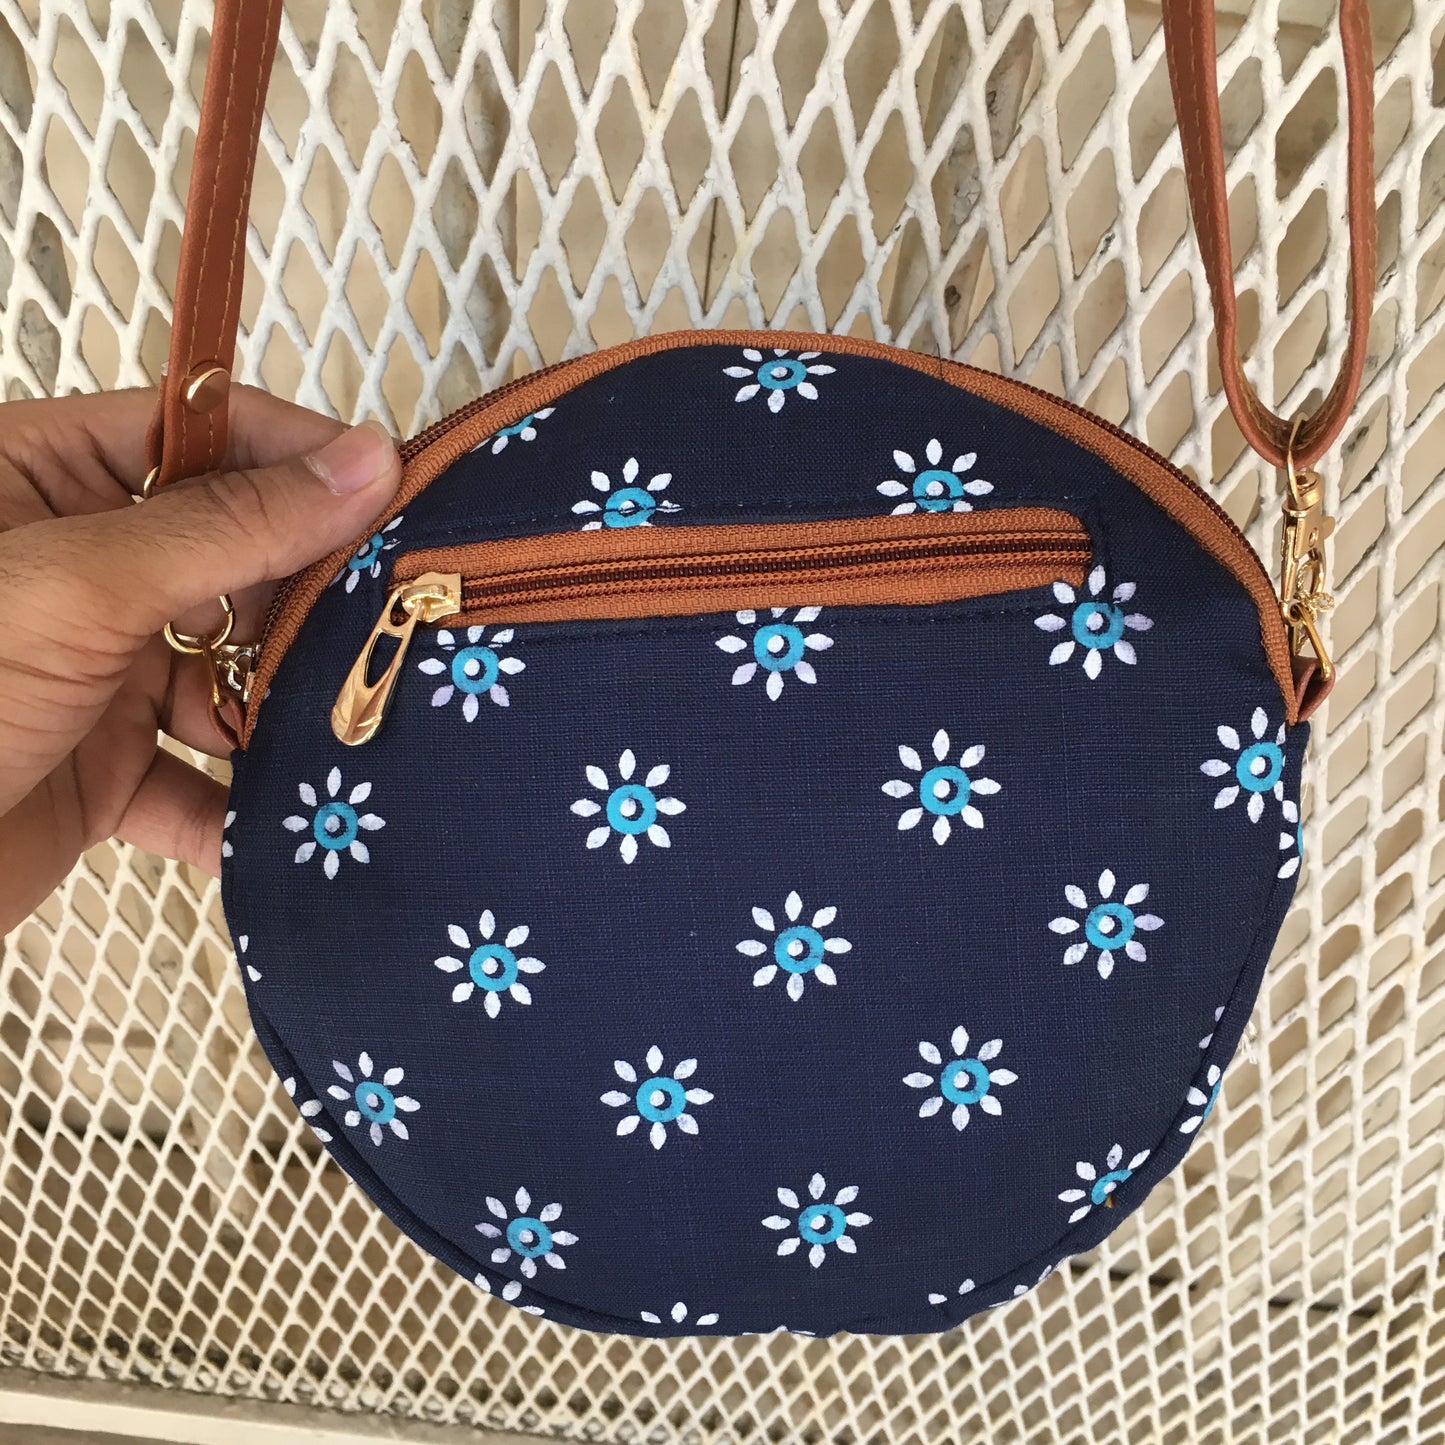 Blue Criss Cross Prints -  Cute Round Sling - Small size